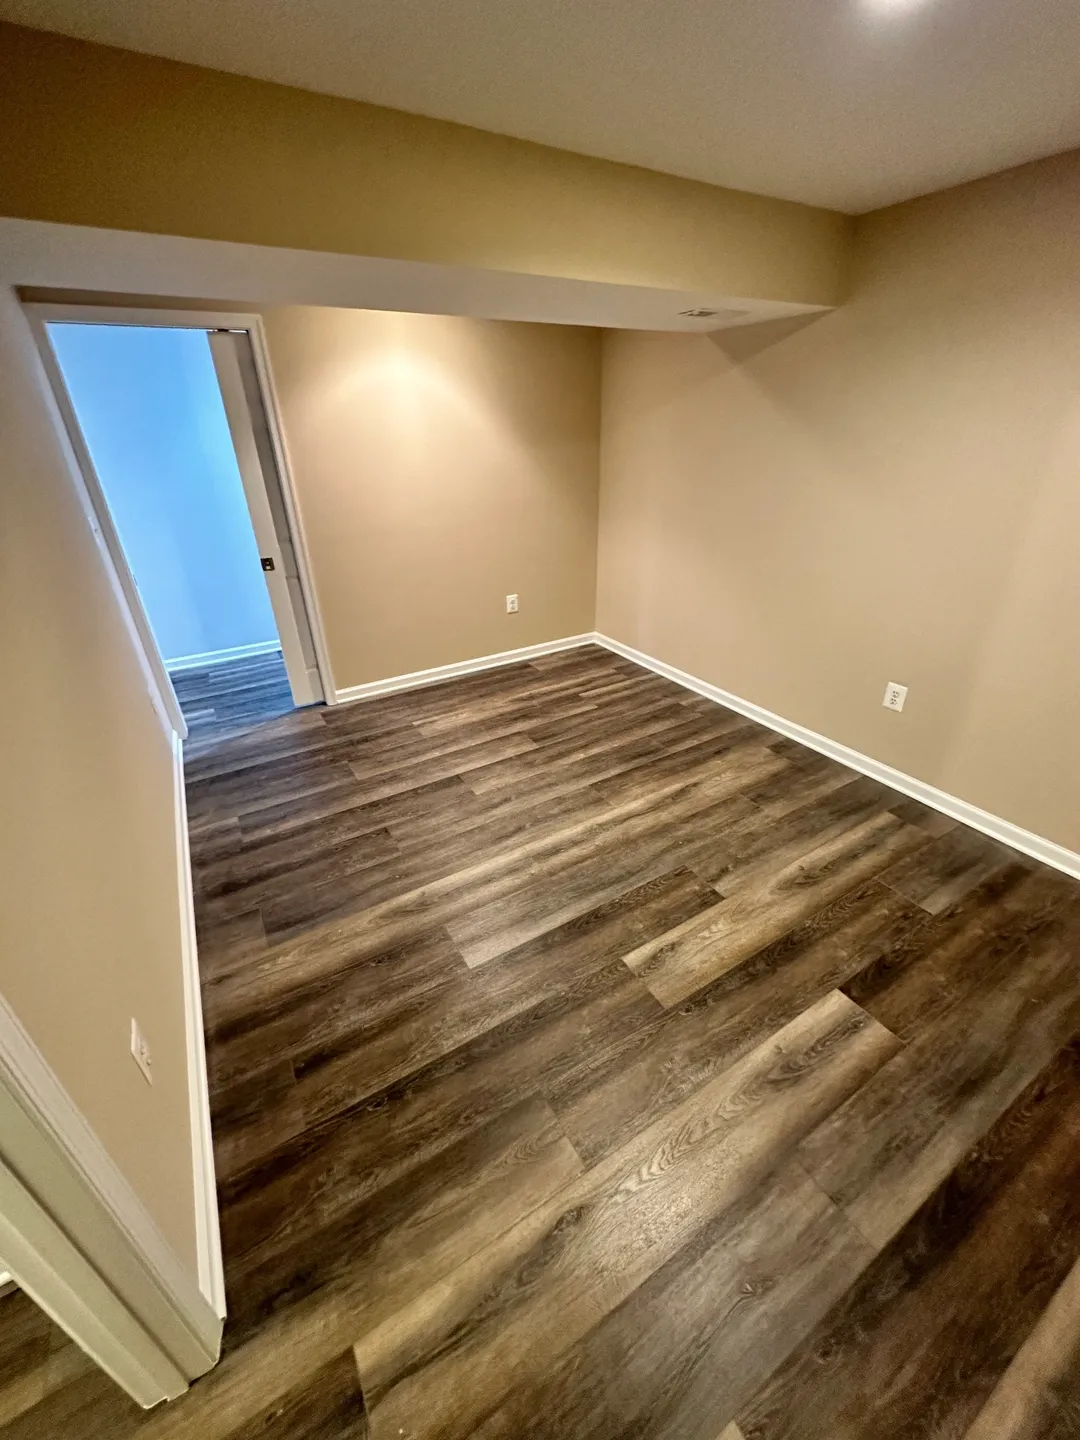 A room with wood floors and a door open.